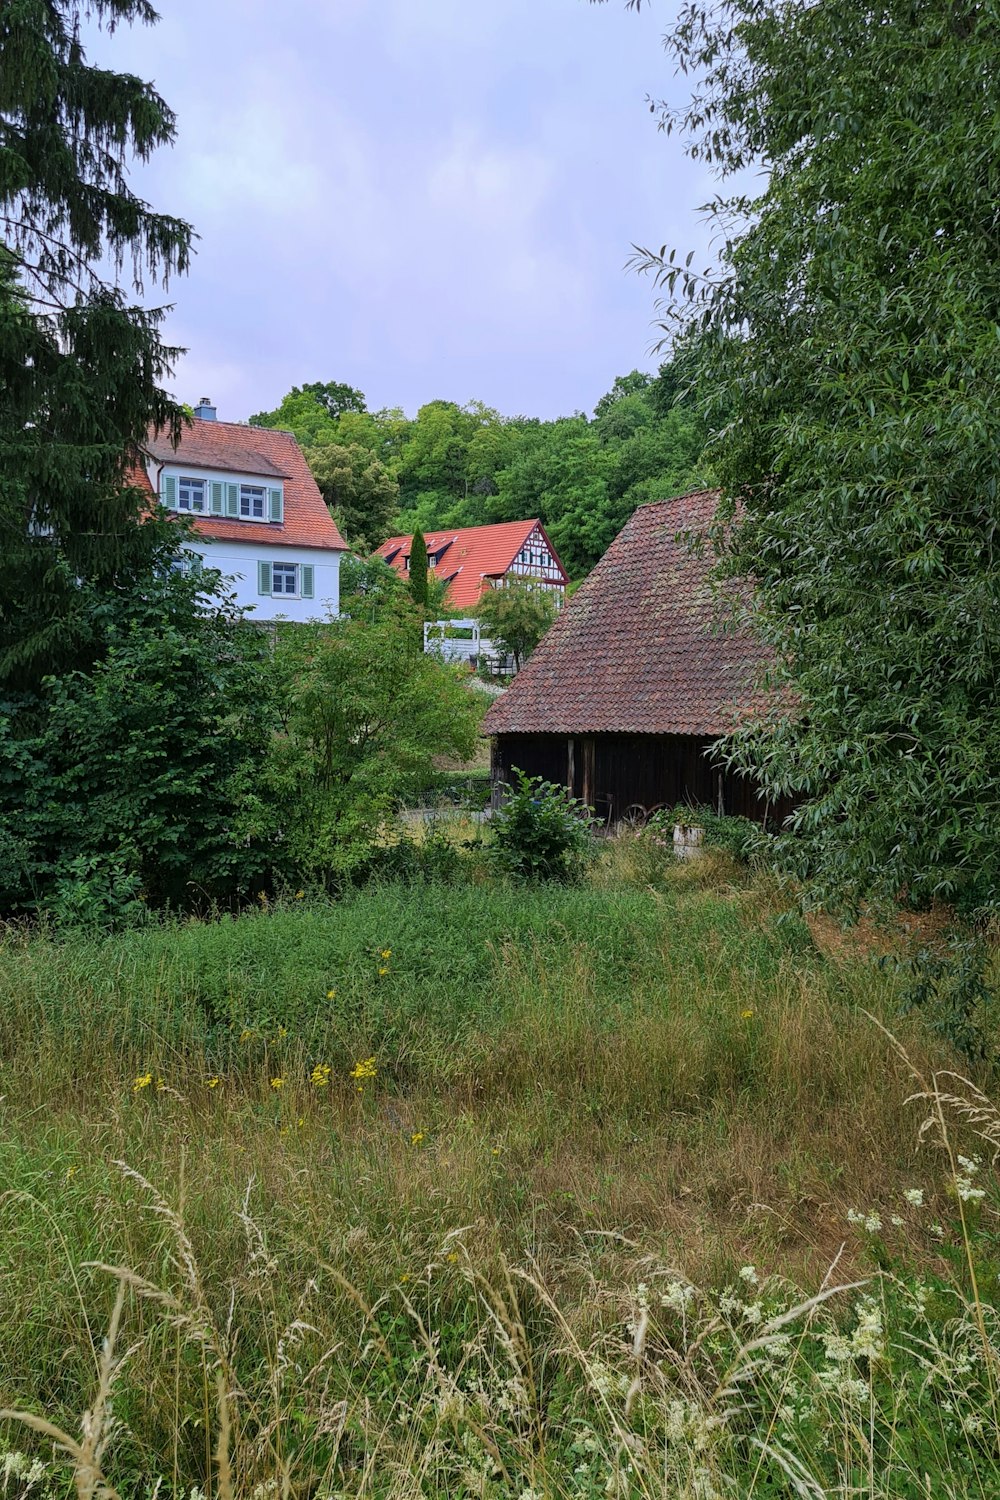 a group of houses in a grassy area